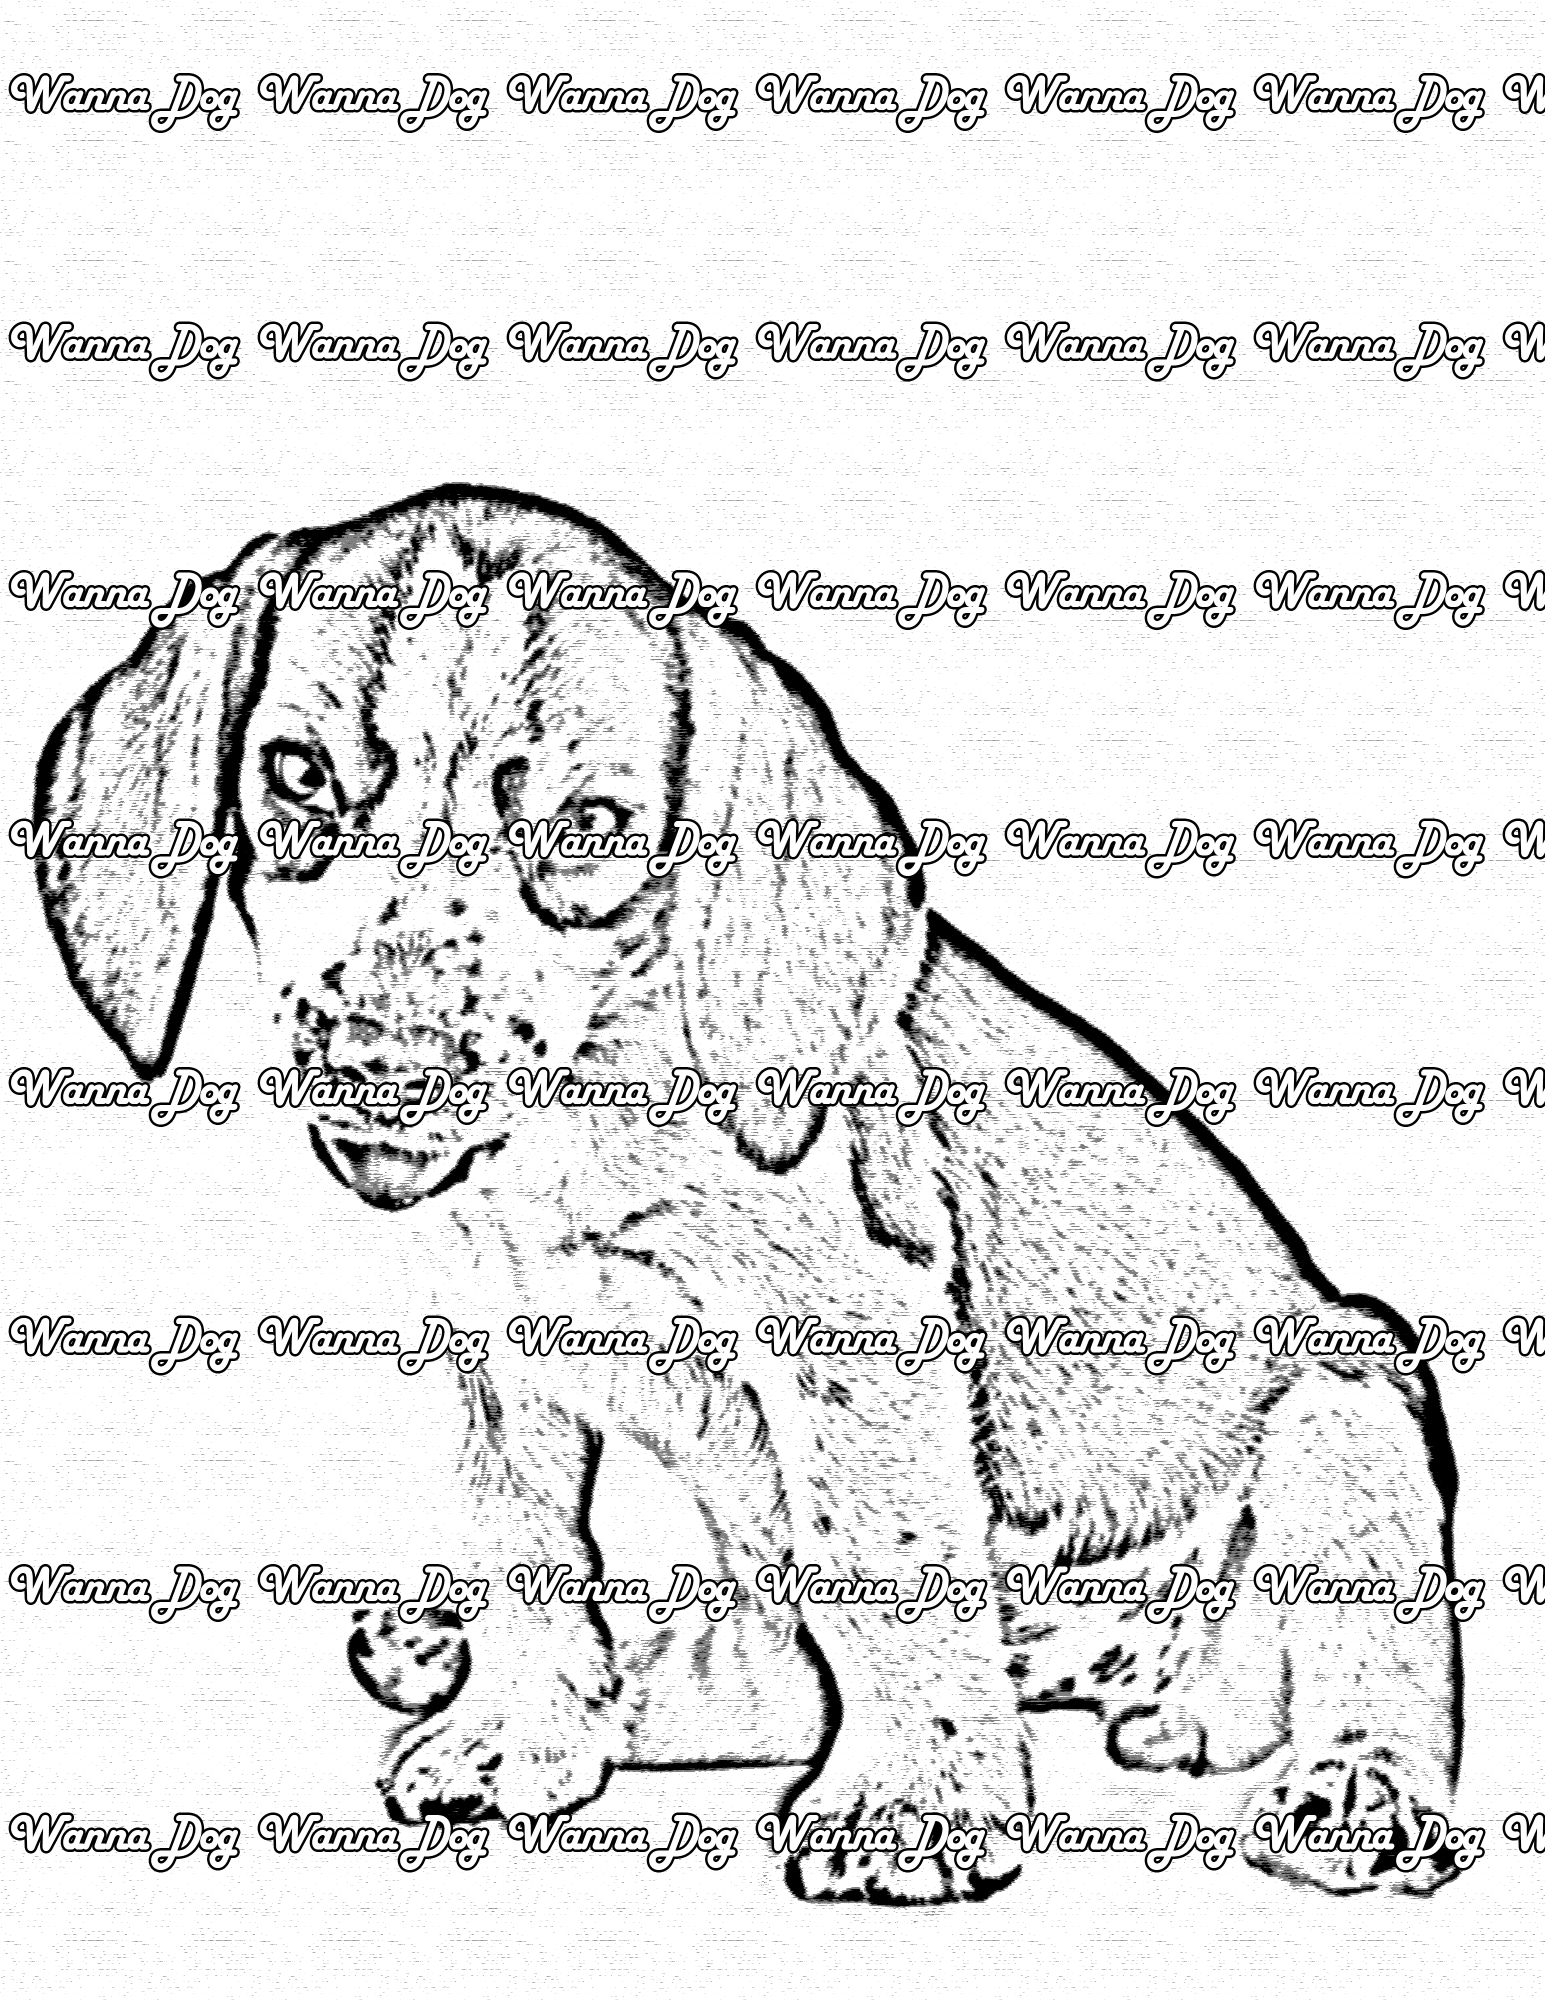 Beagle Puppy Coloring Page of a Beagle Puppy with their tongue out